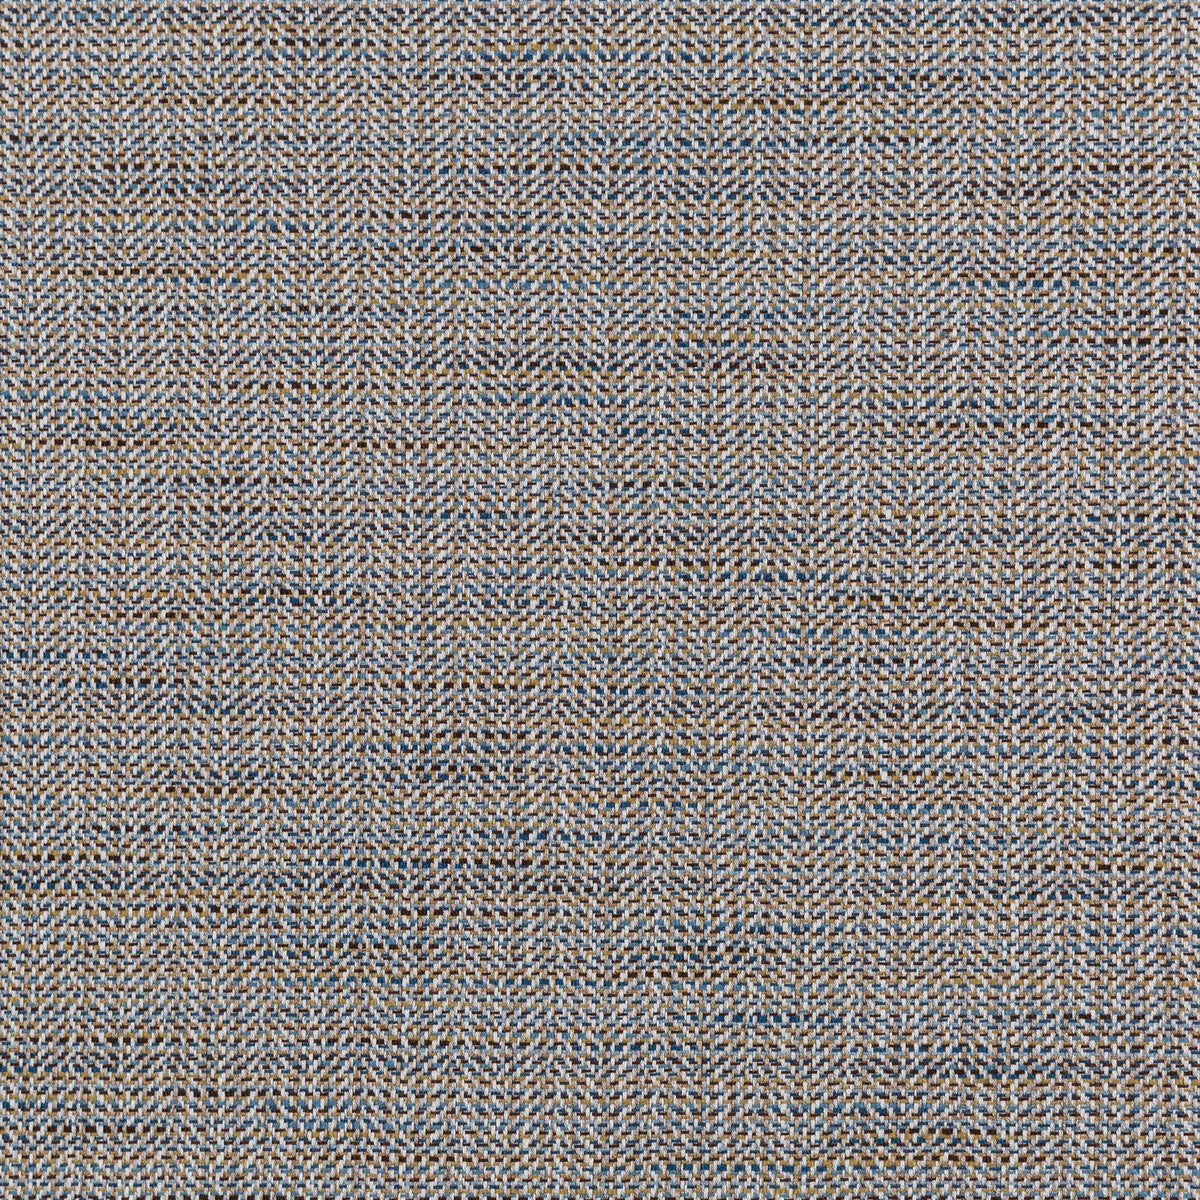 Kravet Smart fabric in 35963-516 color - pattern 35963.516.0 - by Kravet Smart in the Performance Crypton Home collection